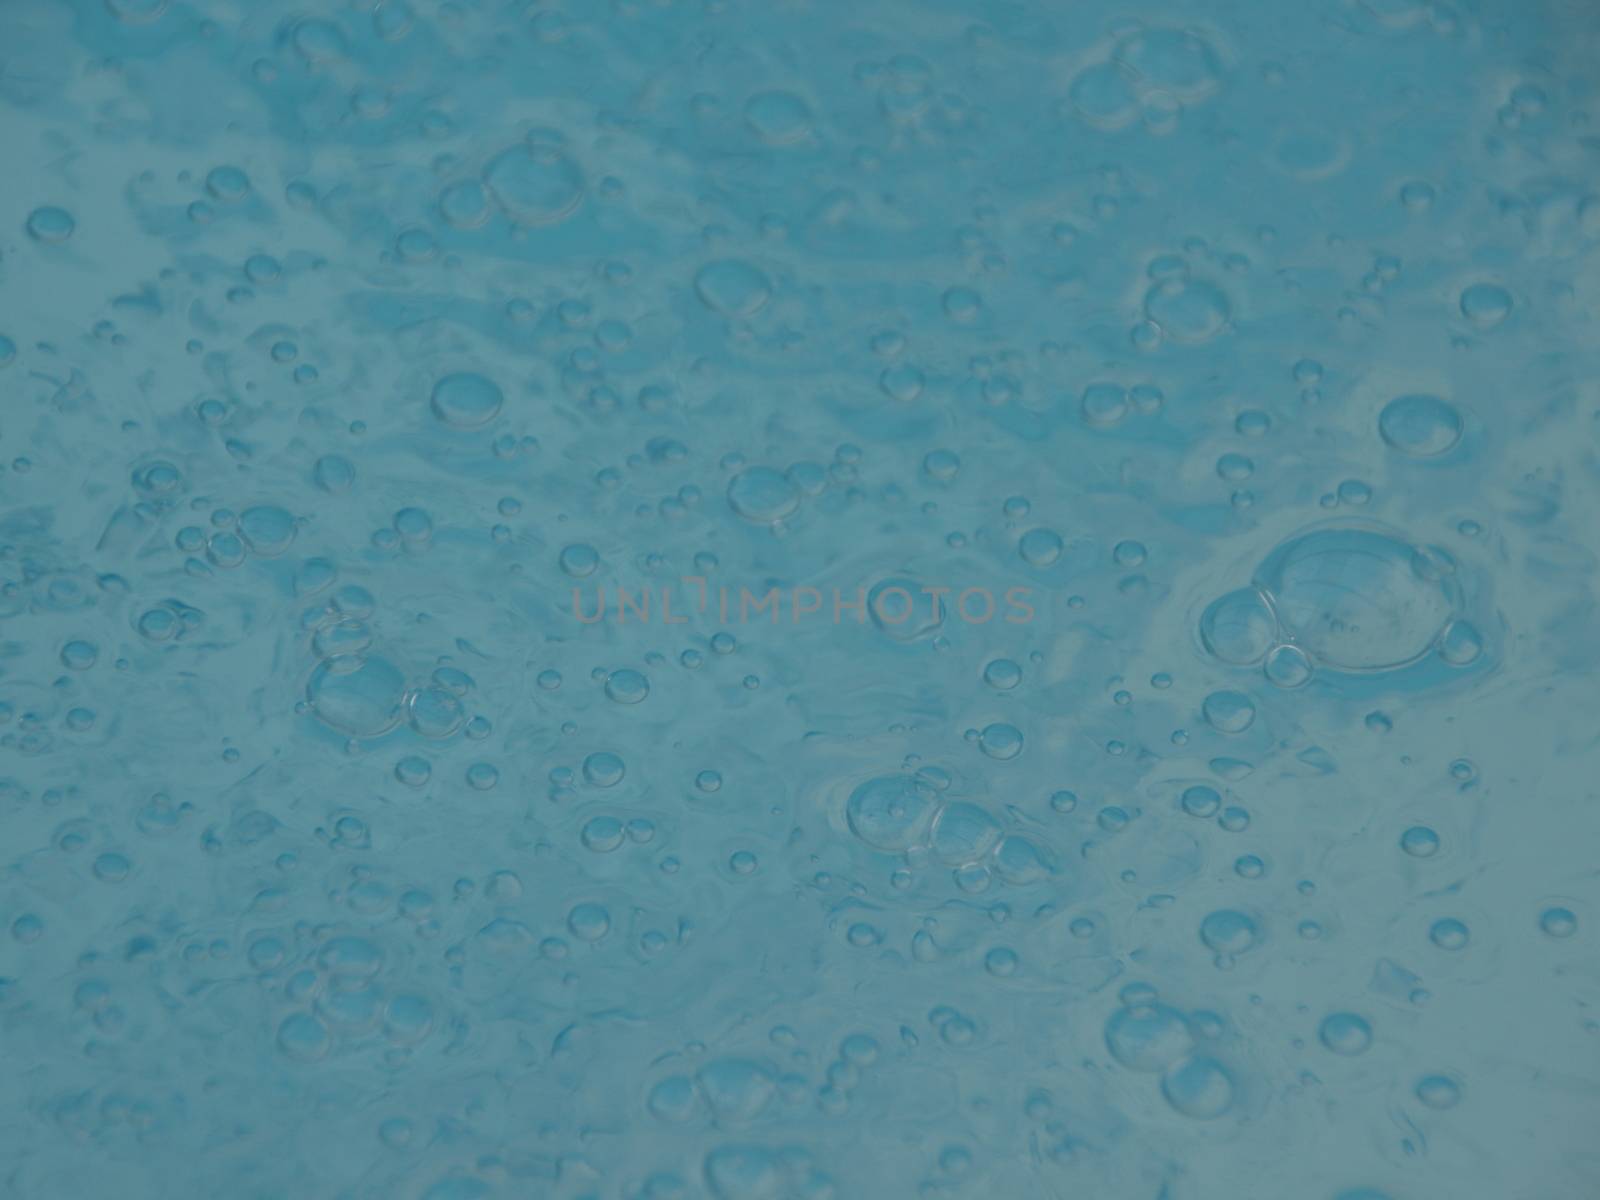 Perspective of Blue Swimming Pool Water Surface with Small Sparkling Bubbles